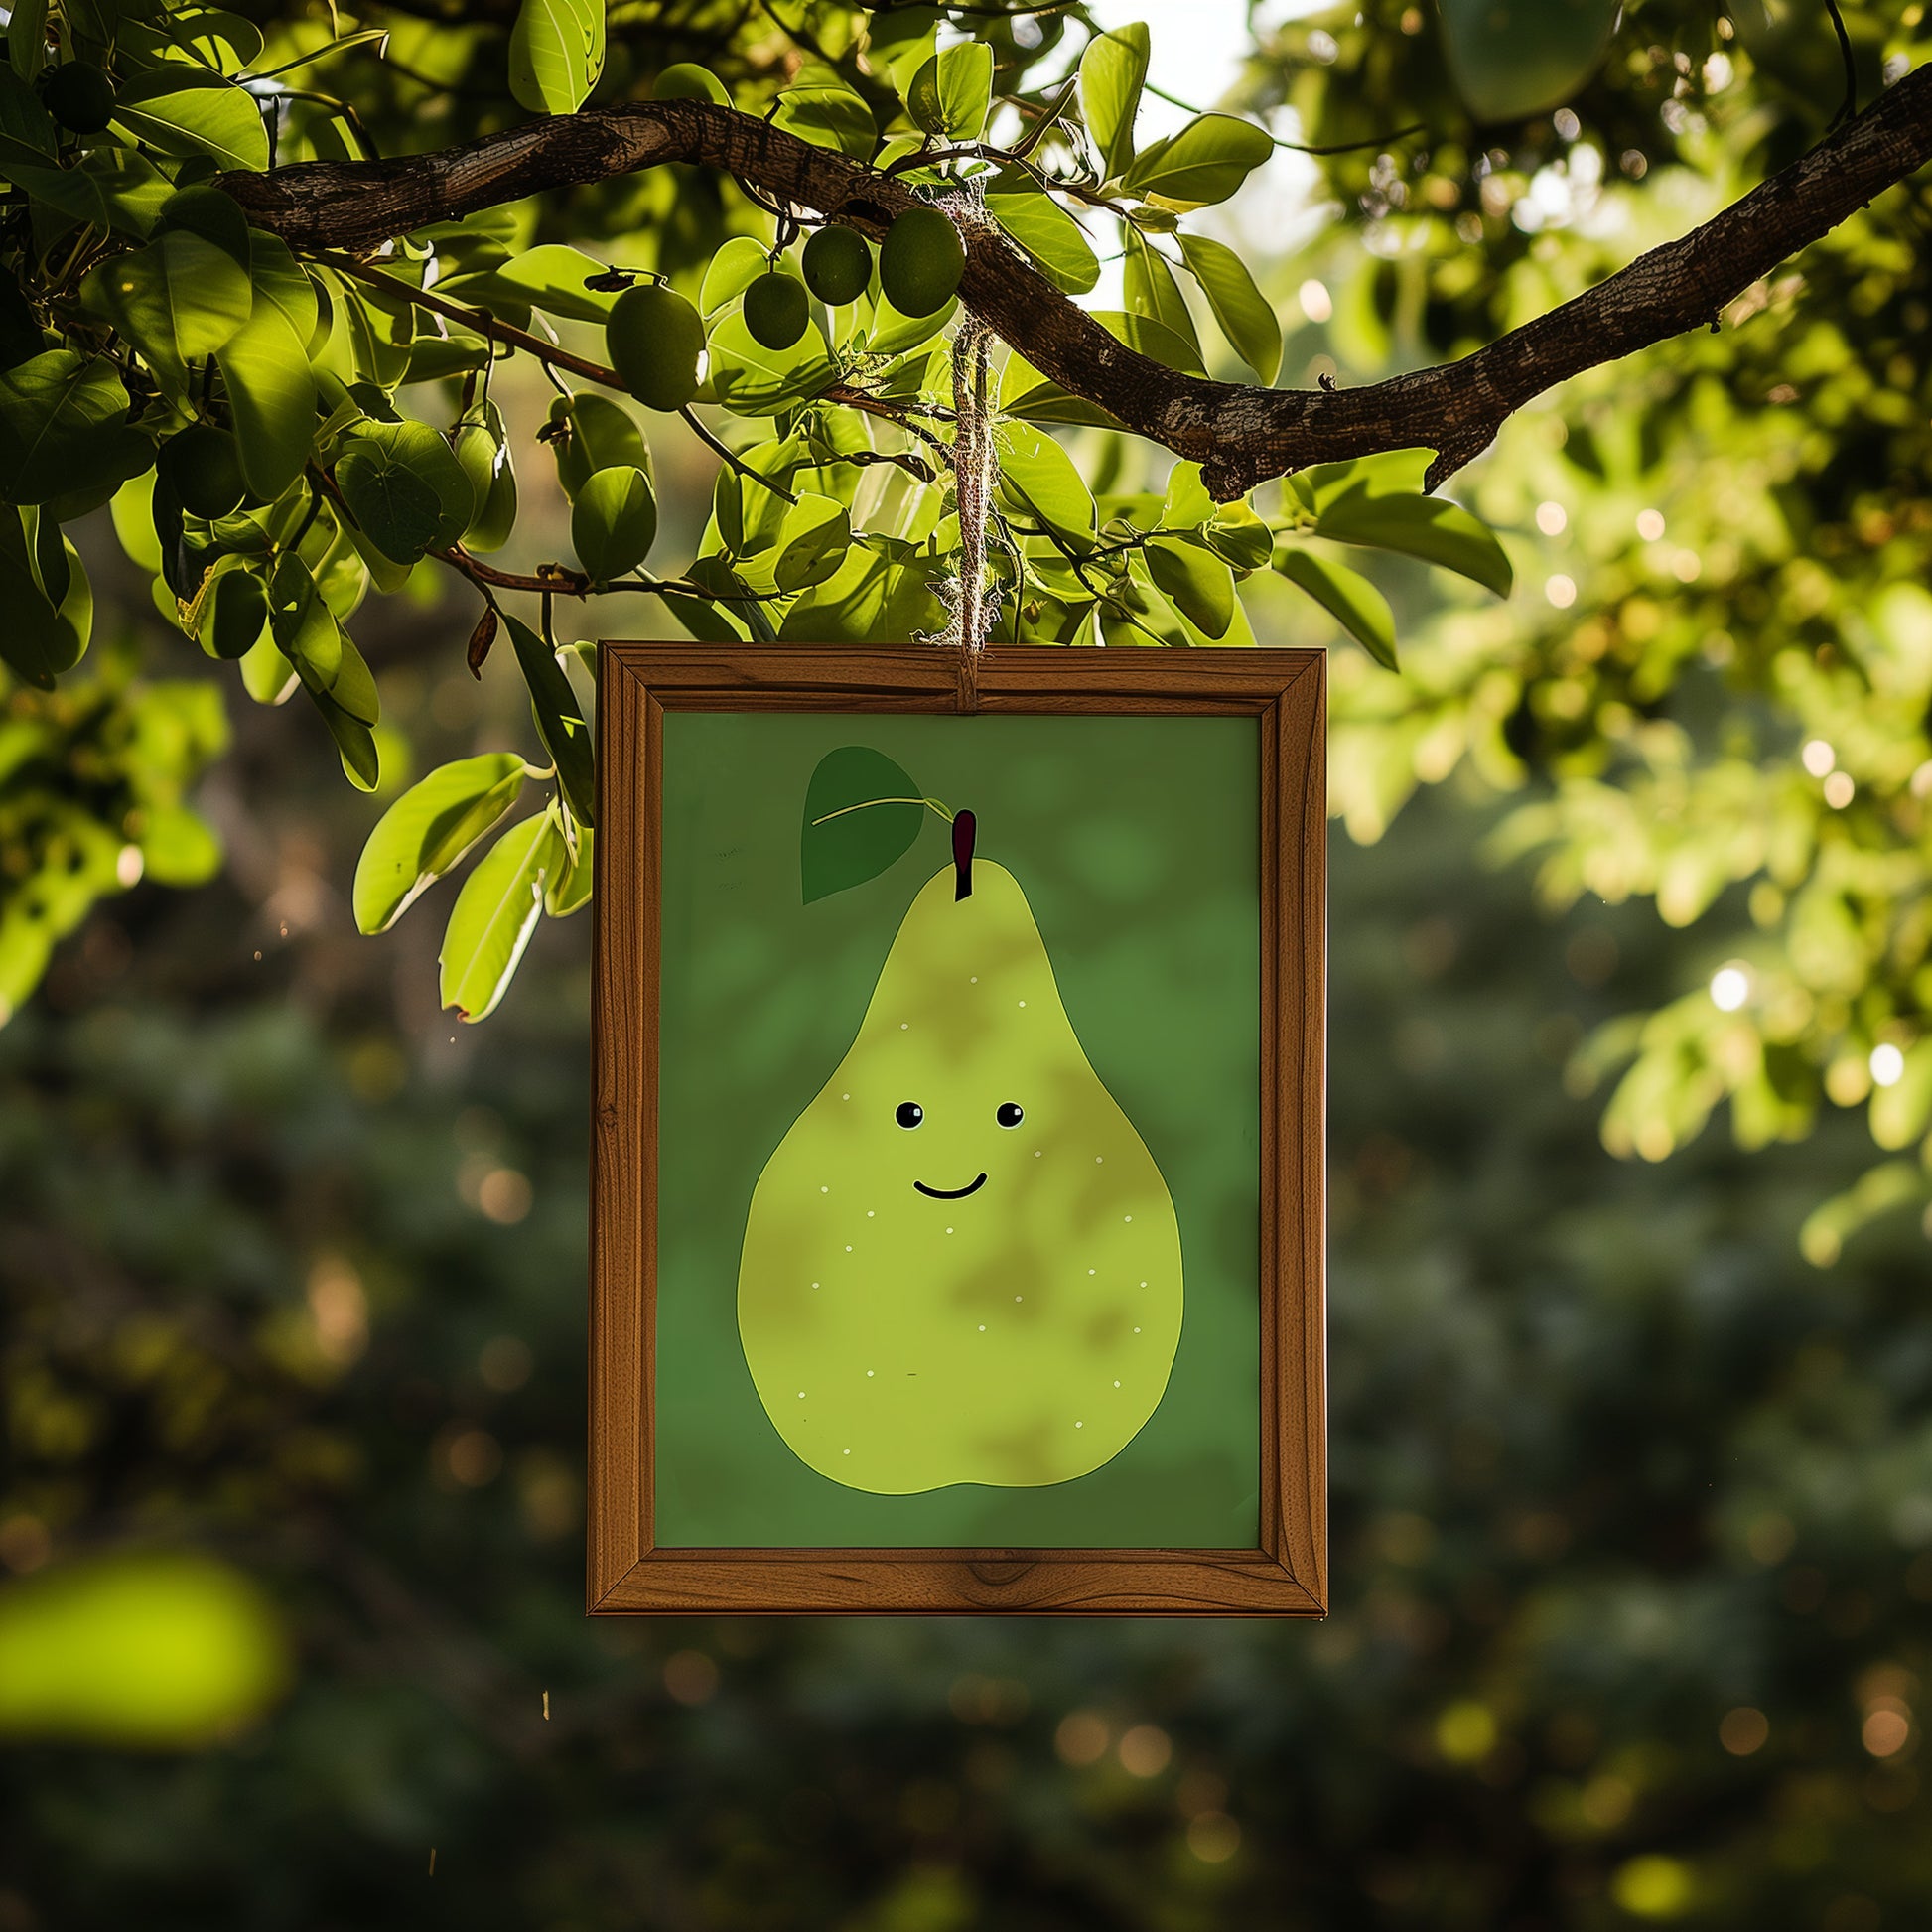 A framed illustration of a smiling pear hanging from a tree branch.